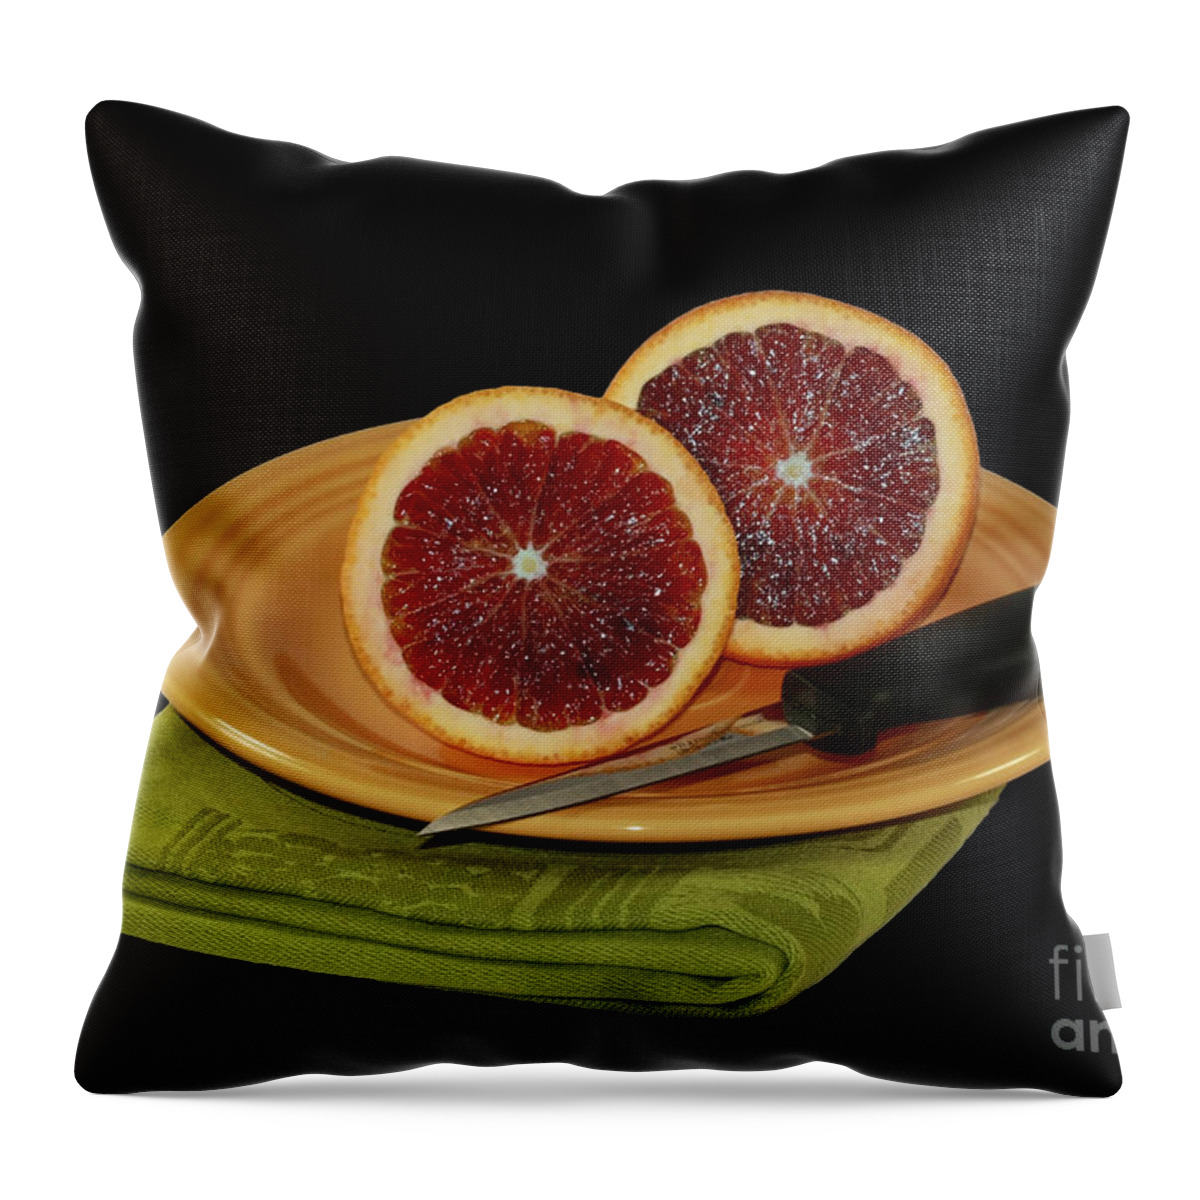 Delicious Throw Pillow featuring the photograph Delicious Juicy Blood Oranges by Inspired Nature Photography Fine Art Photography